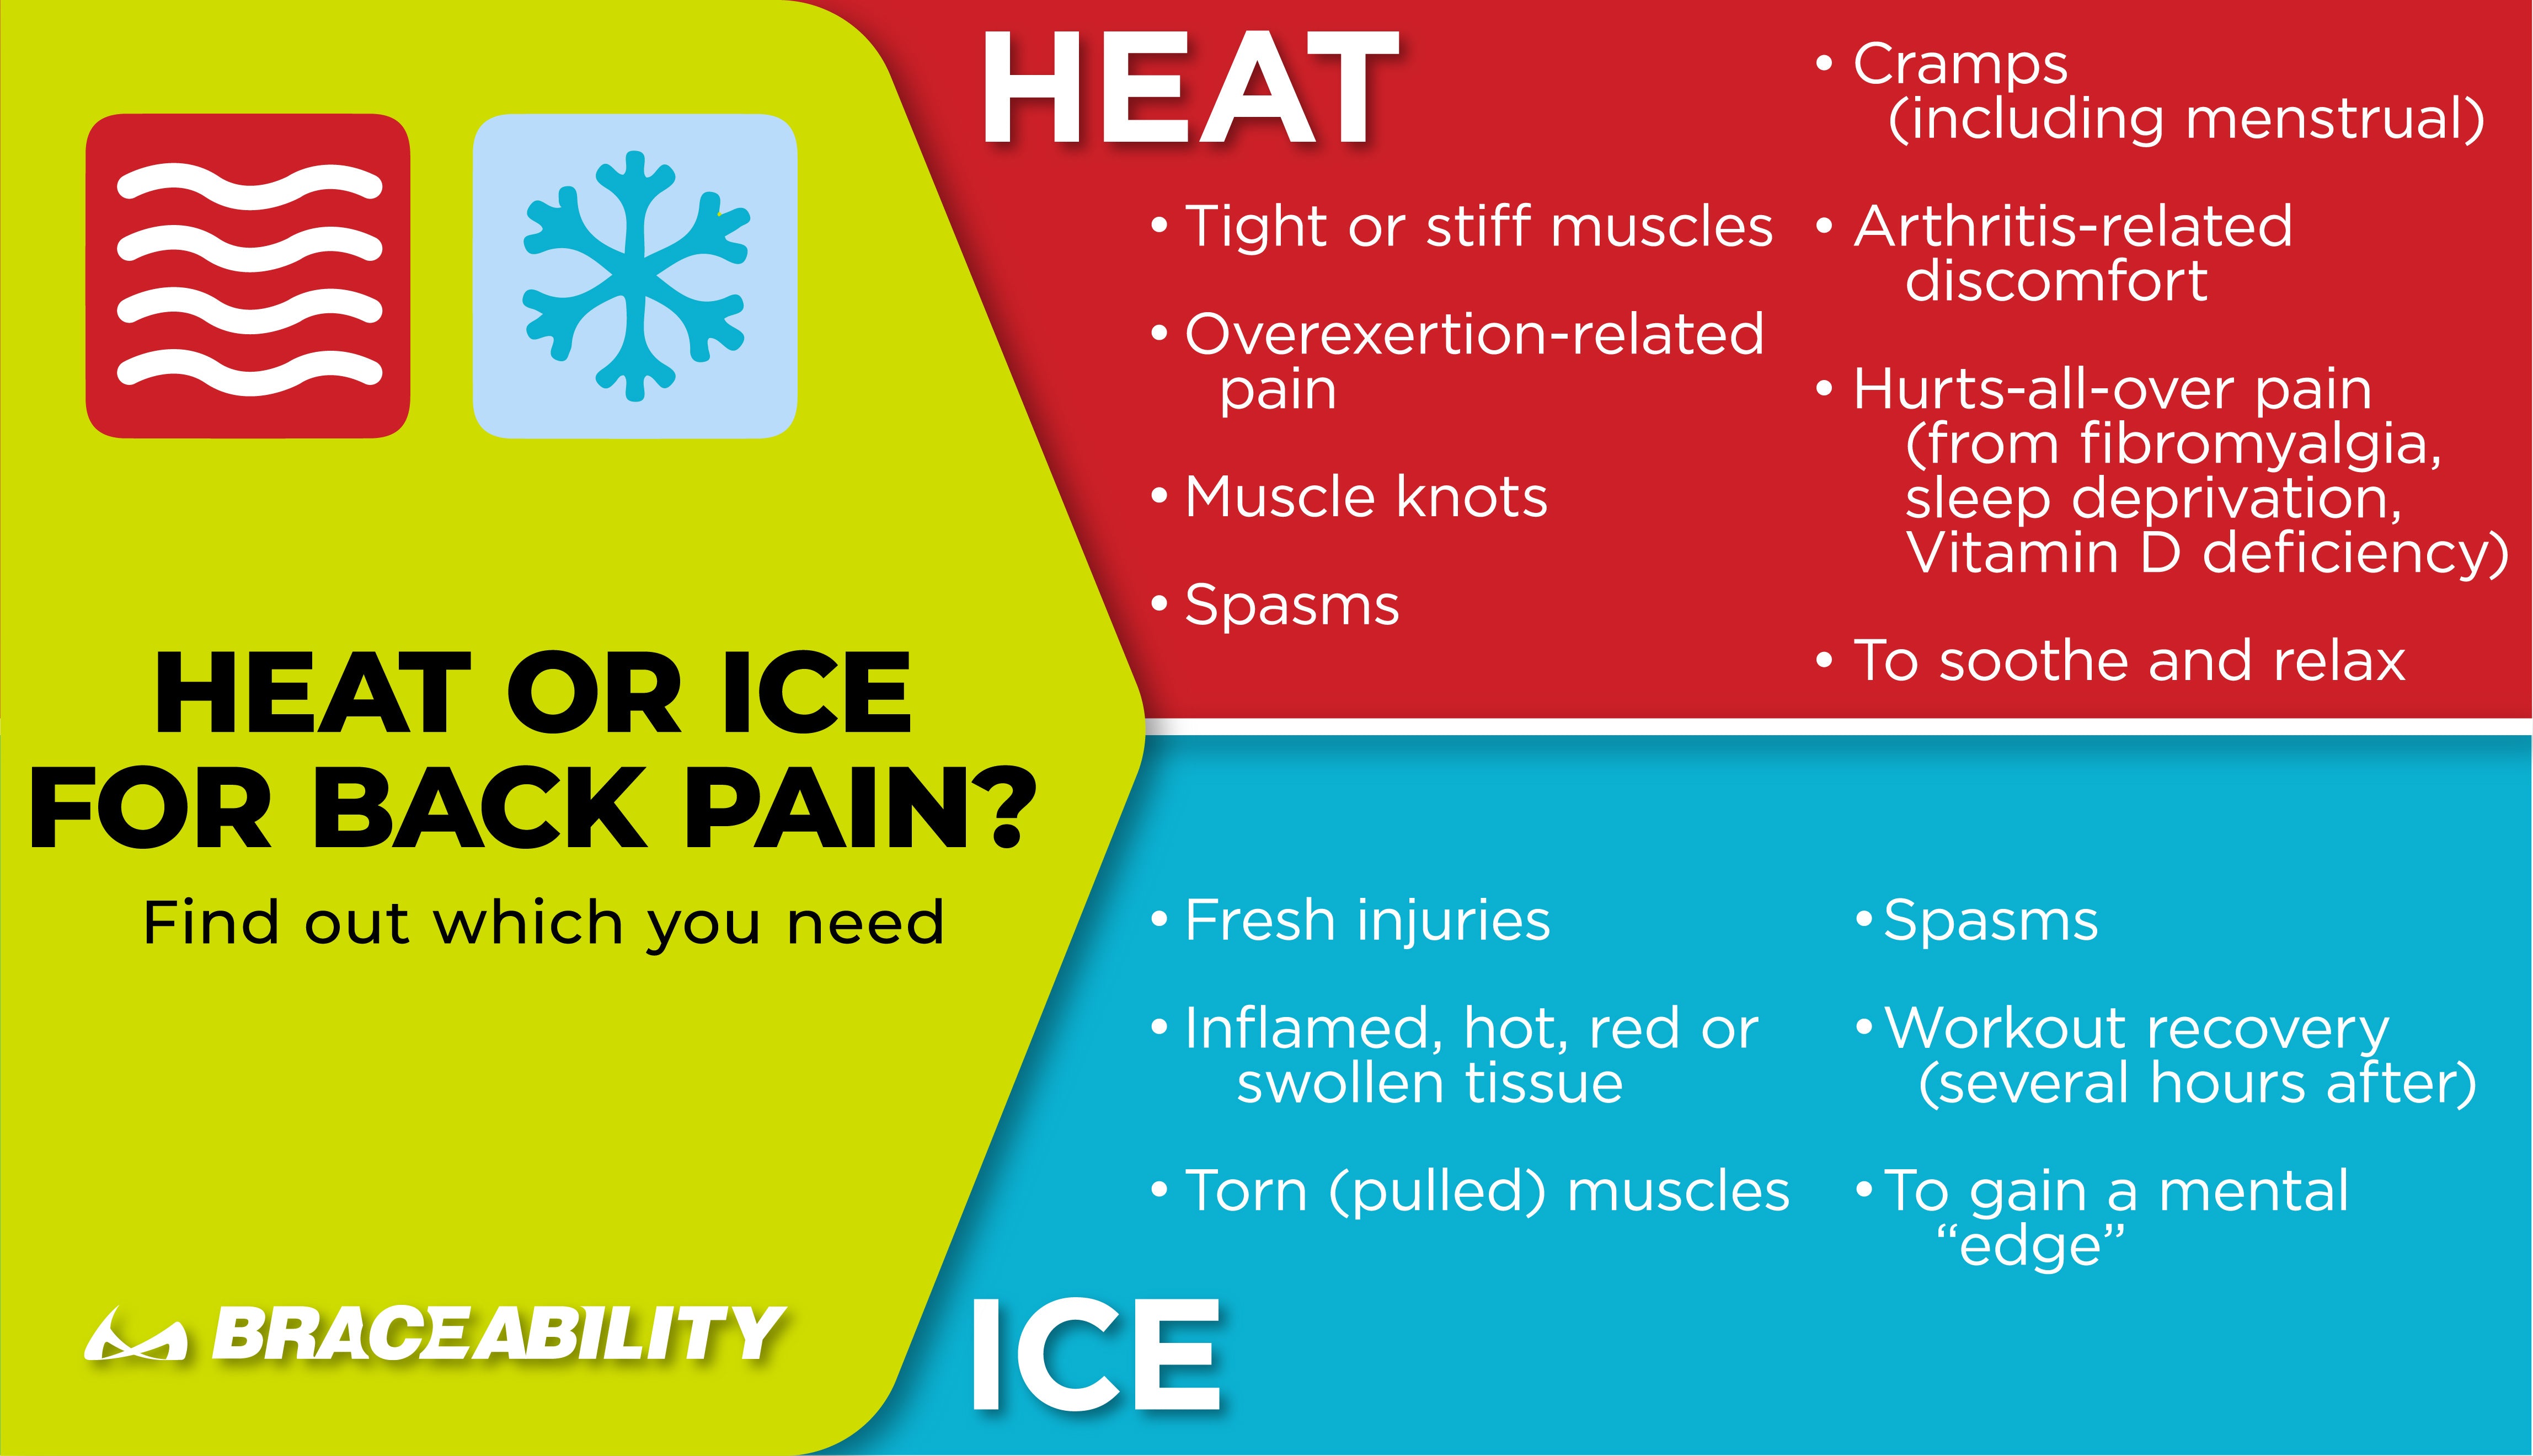 use this infographic to determine if you need to apply heat or ice for back pain